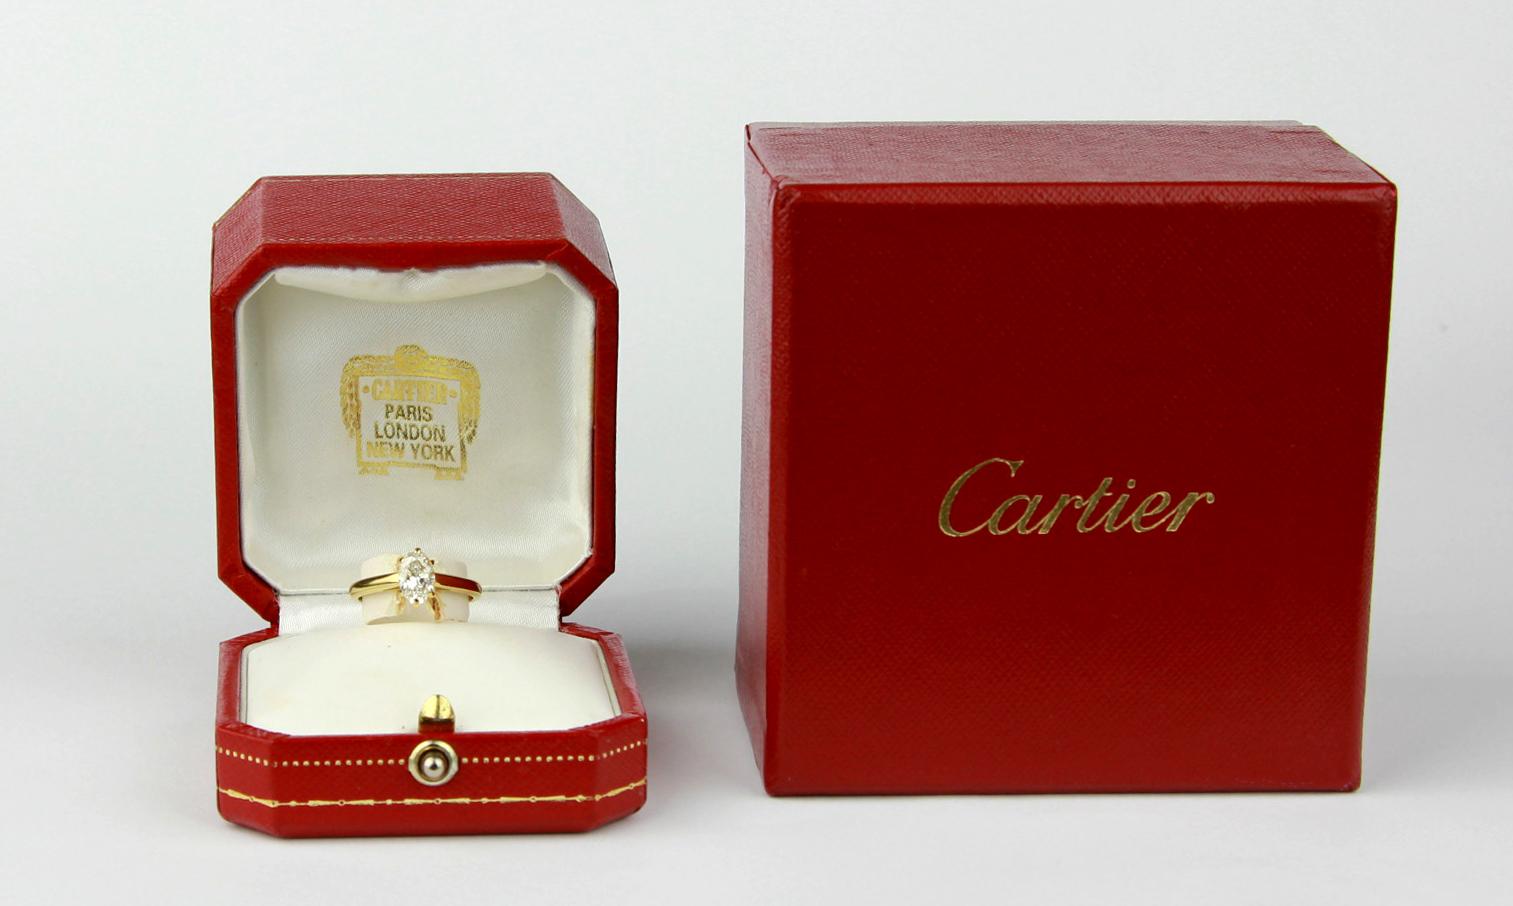 Oval Cut Cartier Diamond, Oval Shape Engagement Ring set in British Hallmarked 18K Gold